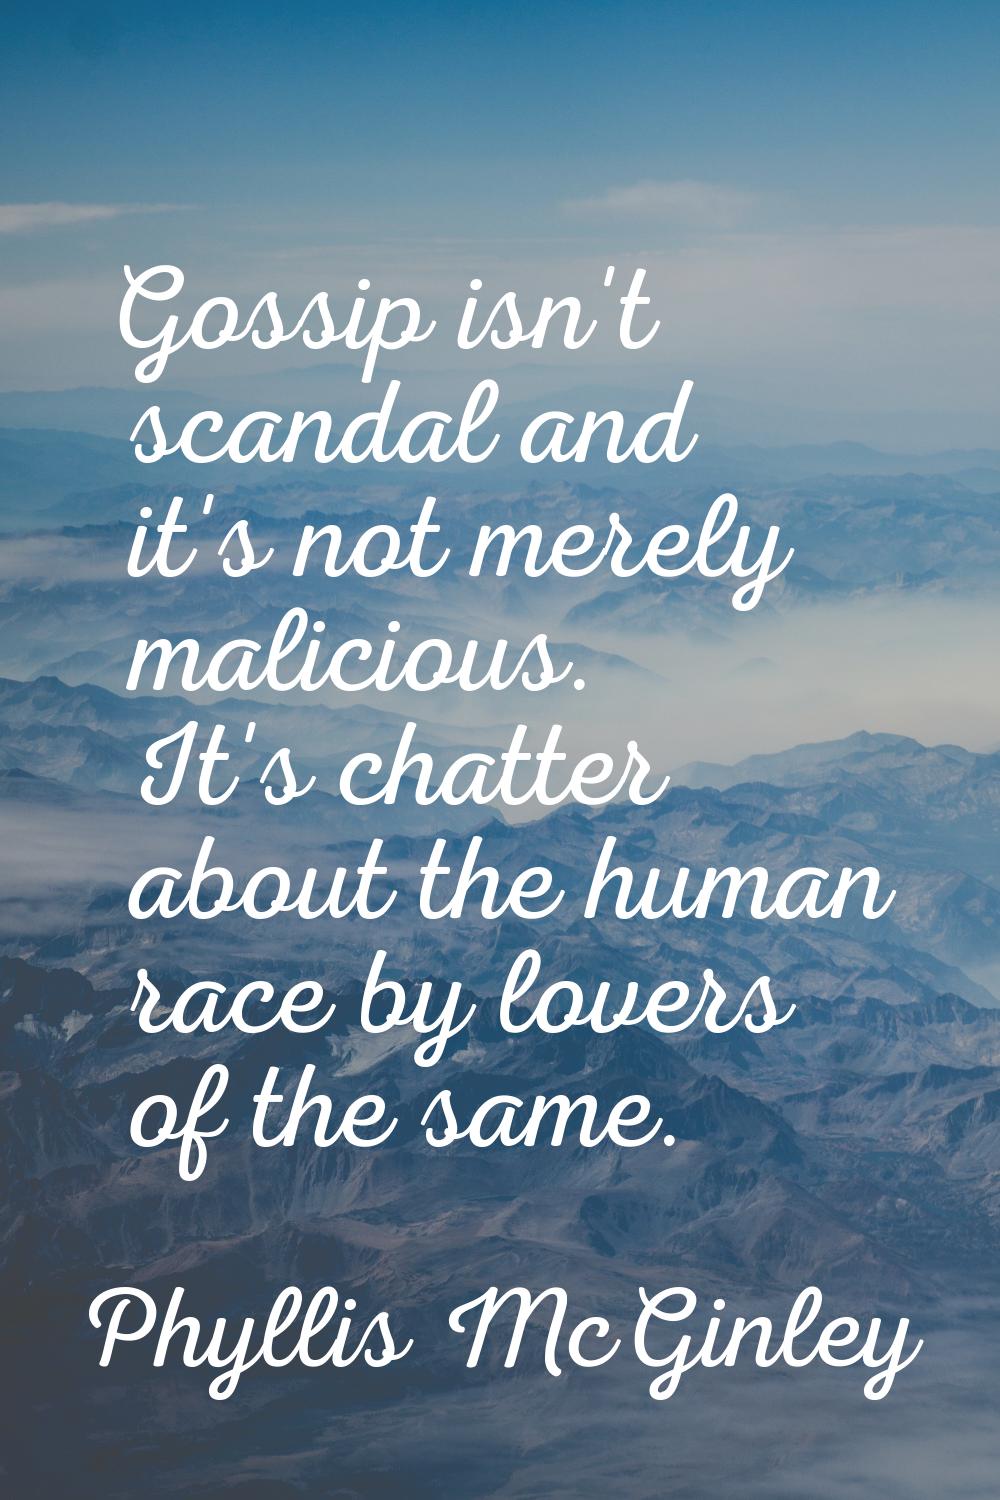 Gossip isn't scandal and it's not merely malicious. It's chatter about the human race by lovers of 